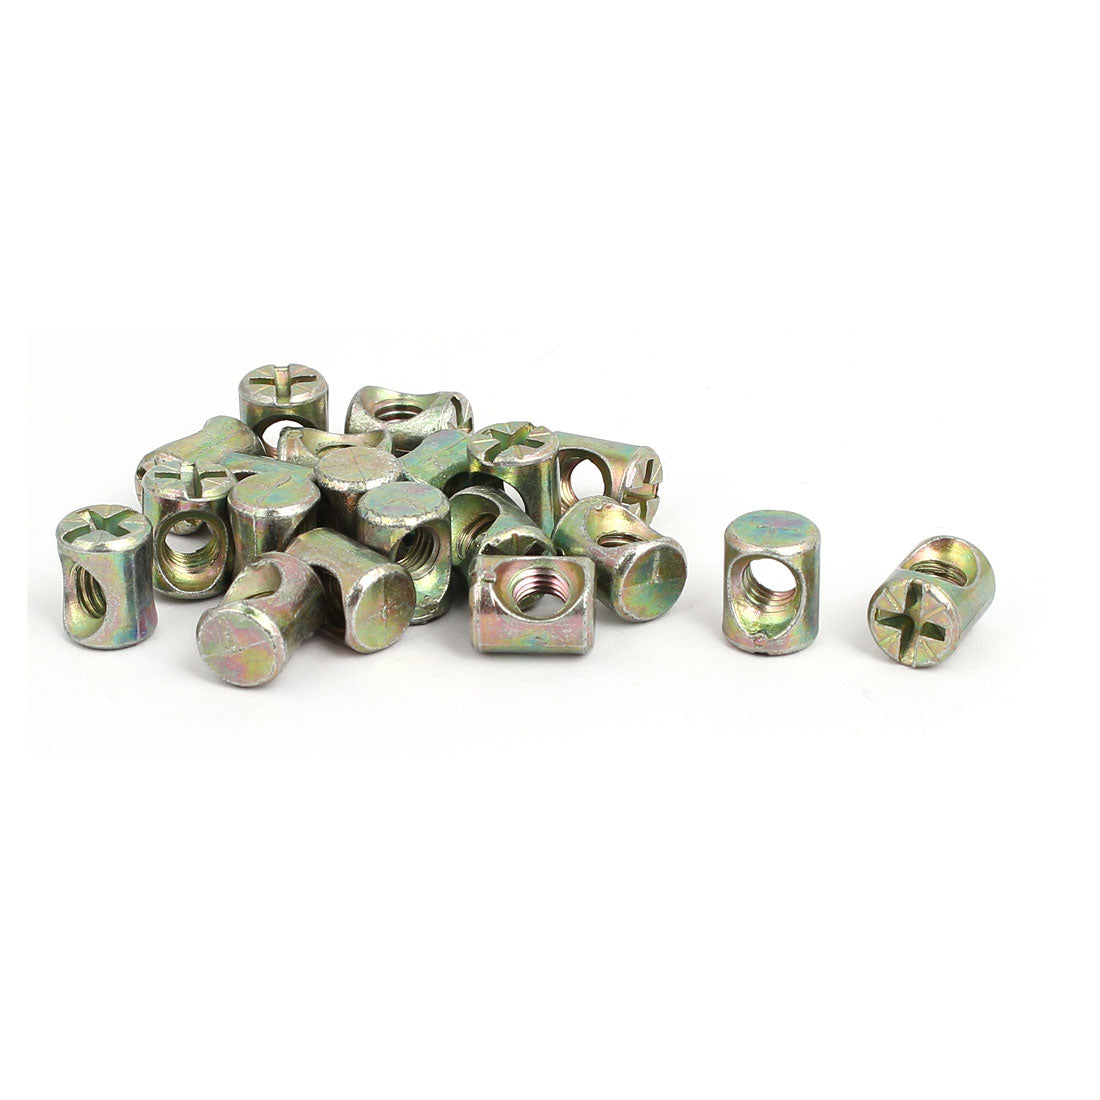 uxcell Uxcell M6 x 12mm Cross Dowel Slotted Barrel Nuts 20PCS for Furniture Chair